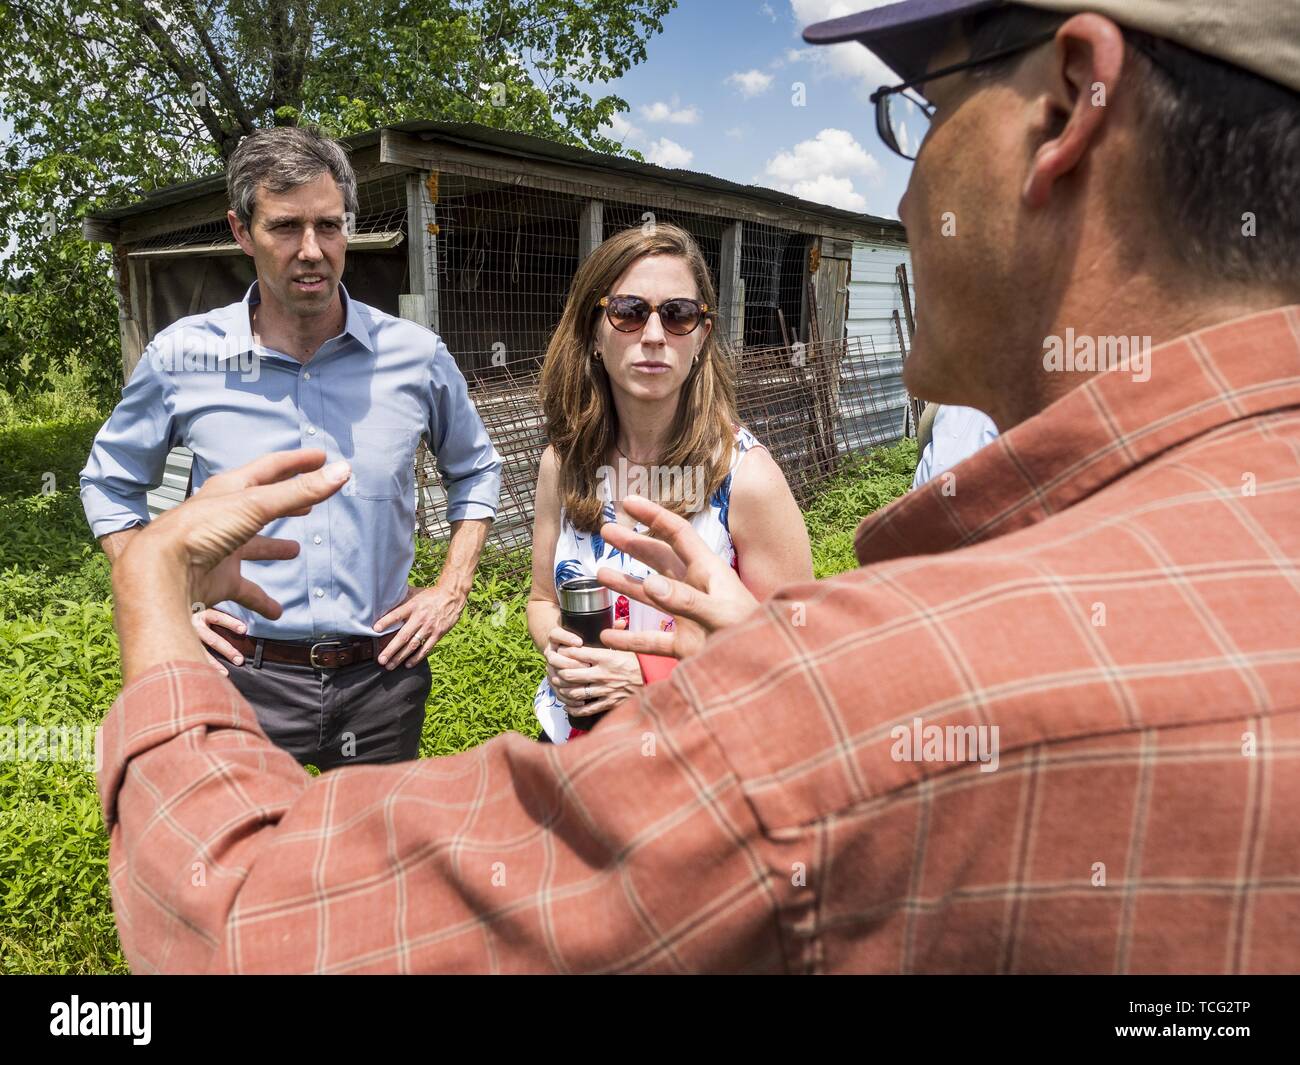 Iowa, USA. 07th June, 2019. BETO O'ROURKE, left, his wife, AMY O'ROURKE, and MATT RUSSELL talk while they tour Russell's farm, Coyote Run Farm. O'Rouke toured Coyote Run Farm in Lacona Friday. He talked to Russell, the farm's co-owner, about the impact of President Trump's tariffs on Iowa farmers and how climate change was changing American agriculture. O'Rourke, running to be the 2020 Democratic nominee for the US Presidency, has made climate change a central part of his campaign. Iowa traditionally hosts the the first selection event of the presidential election cycle. Credit: ZUMA Press, In Stock Photo